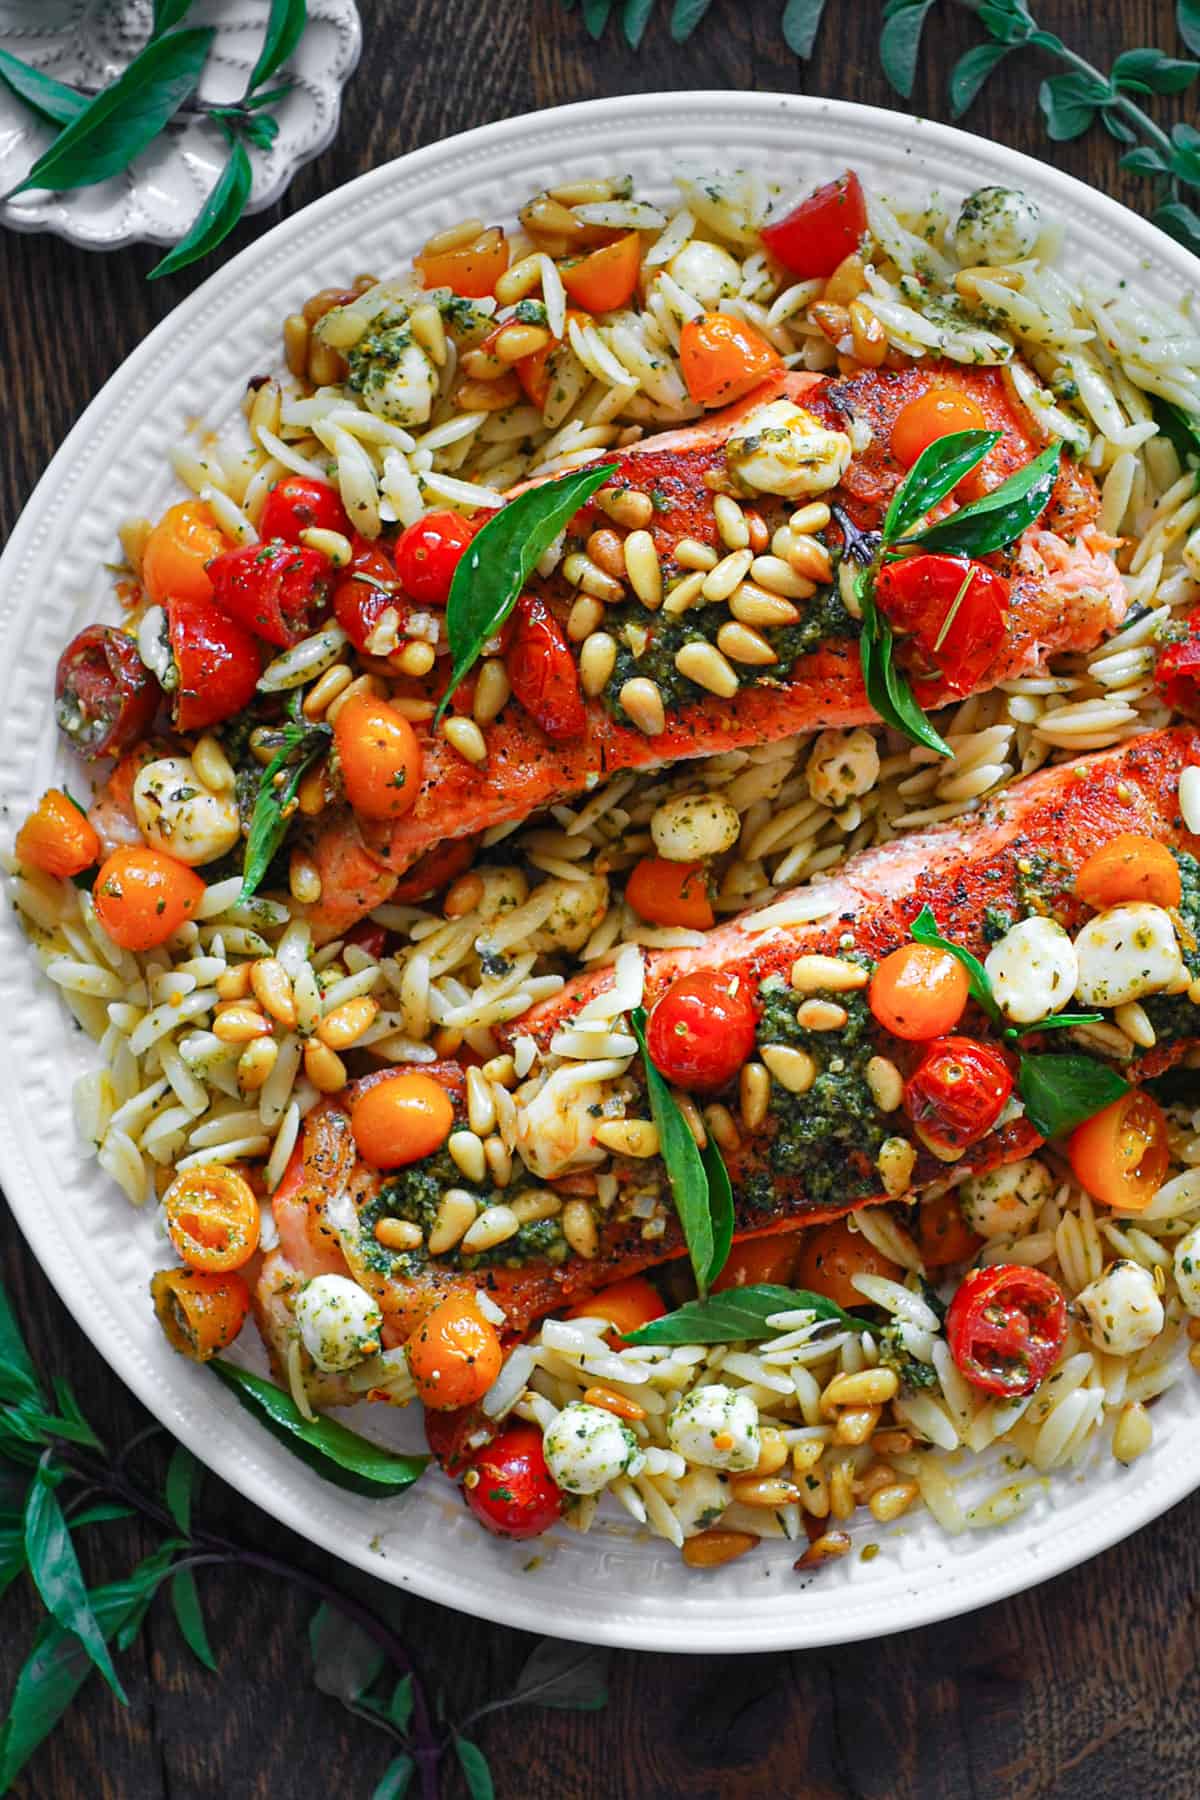 Salmon fillets with orzo, basil pesto, grape tomatoes, Mozzarella cheese, and pine nuts - on a large white plate.